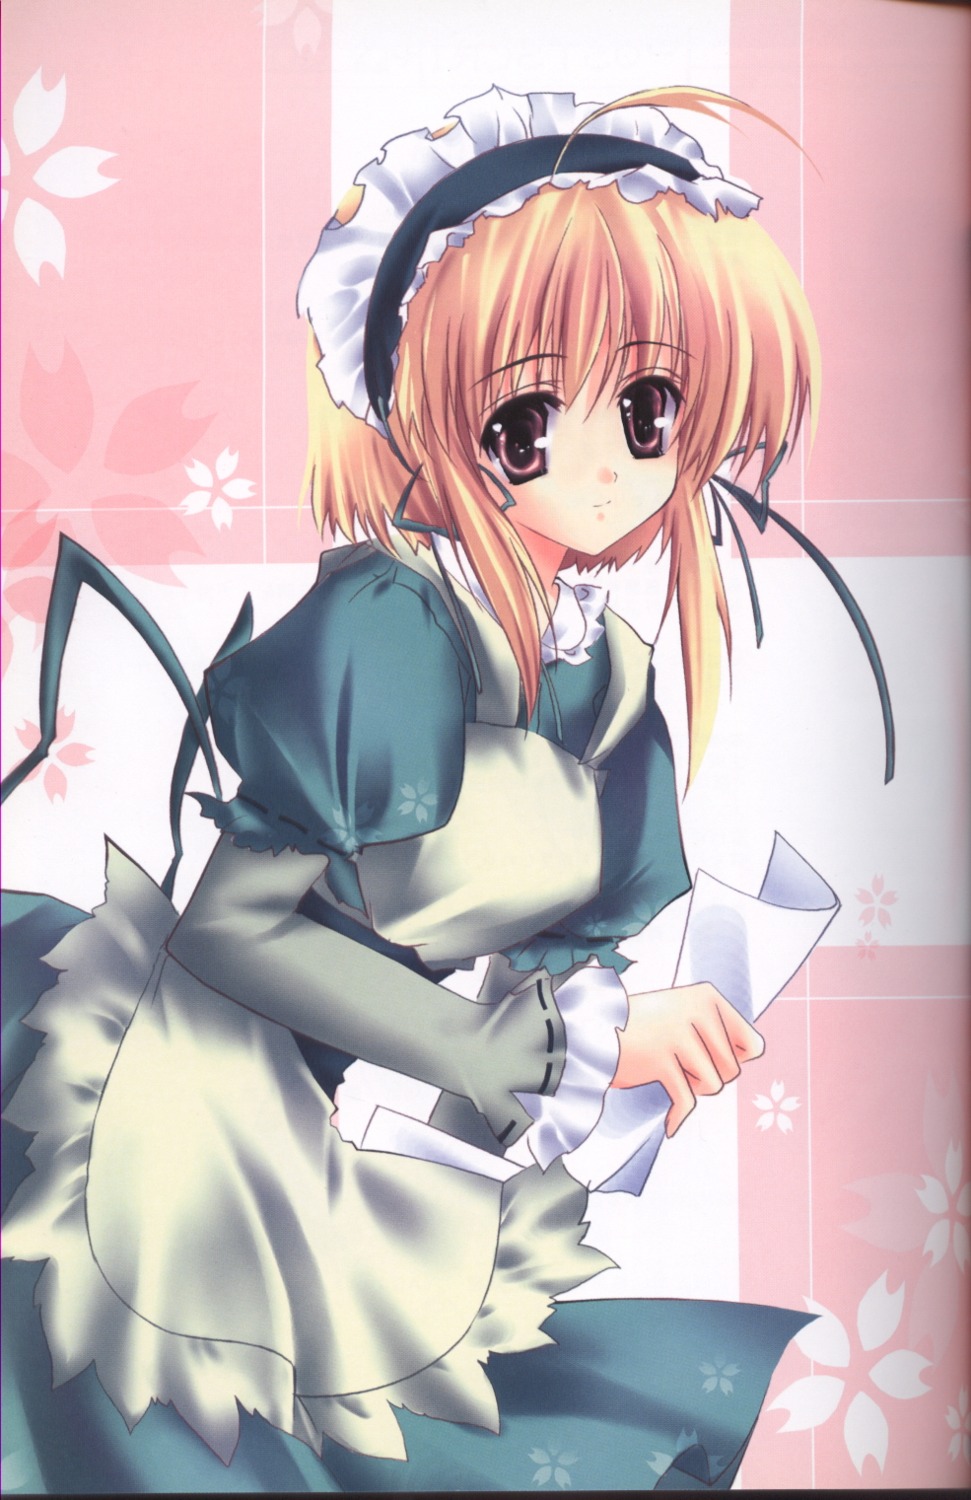 binding_discoloration maid rei